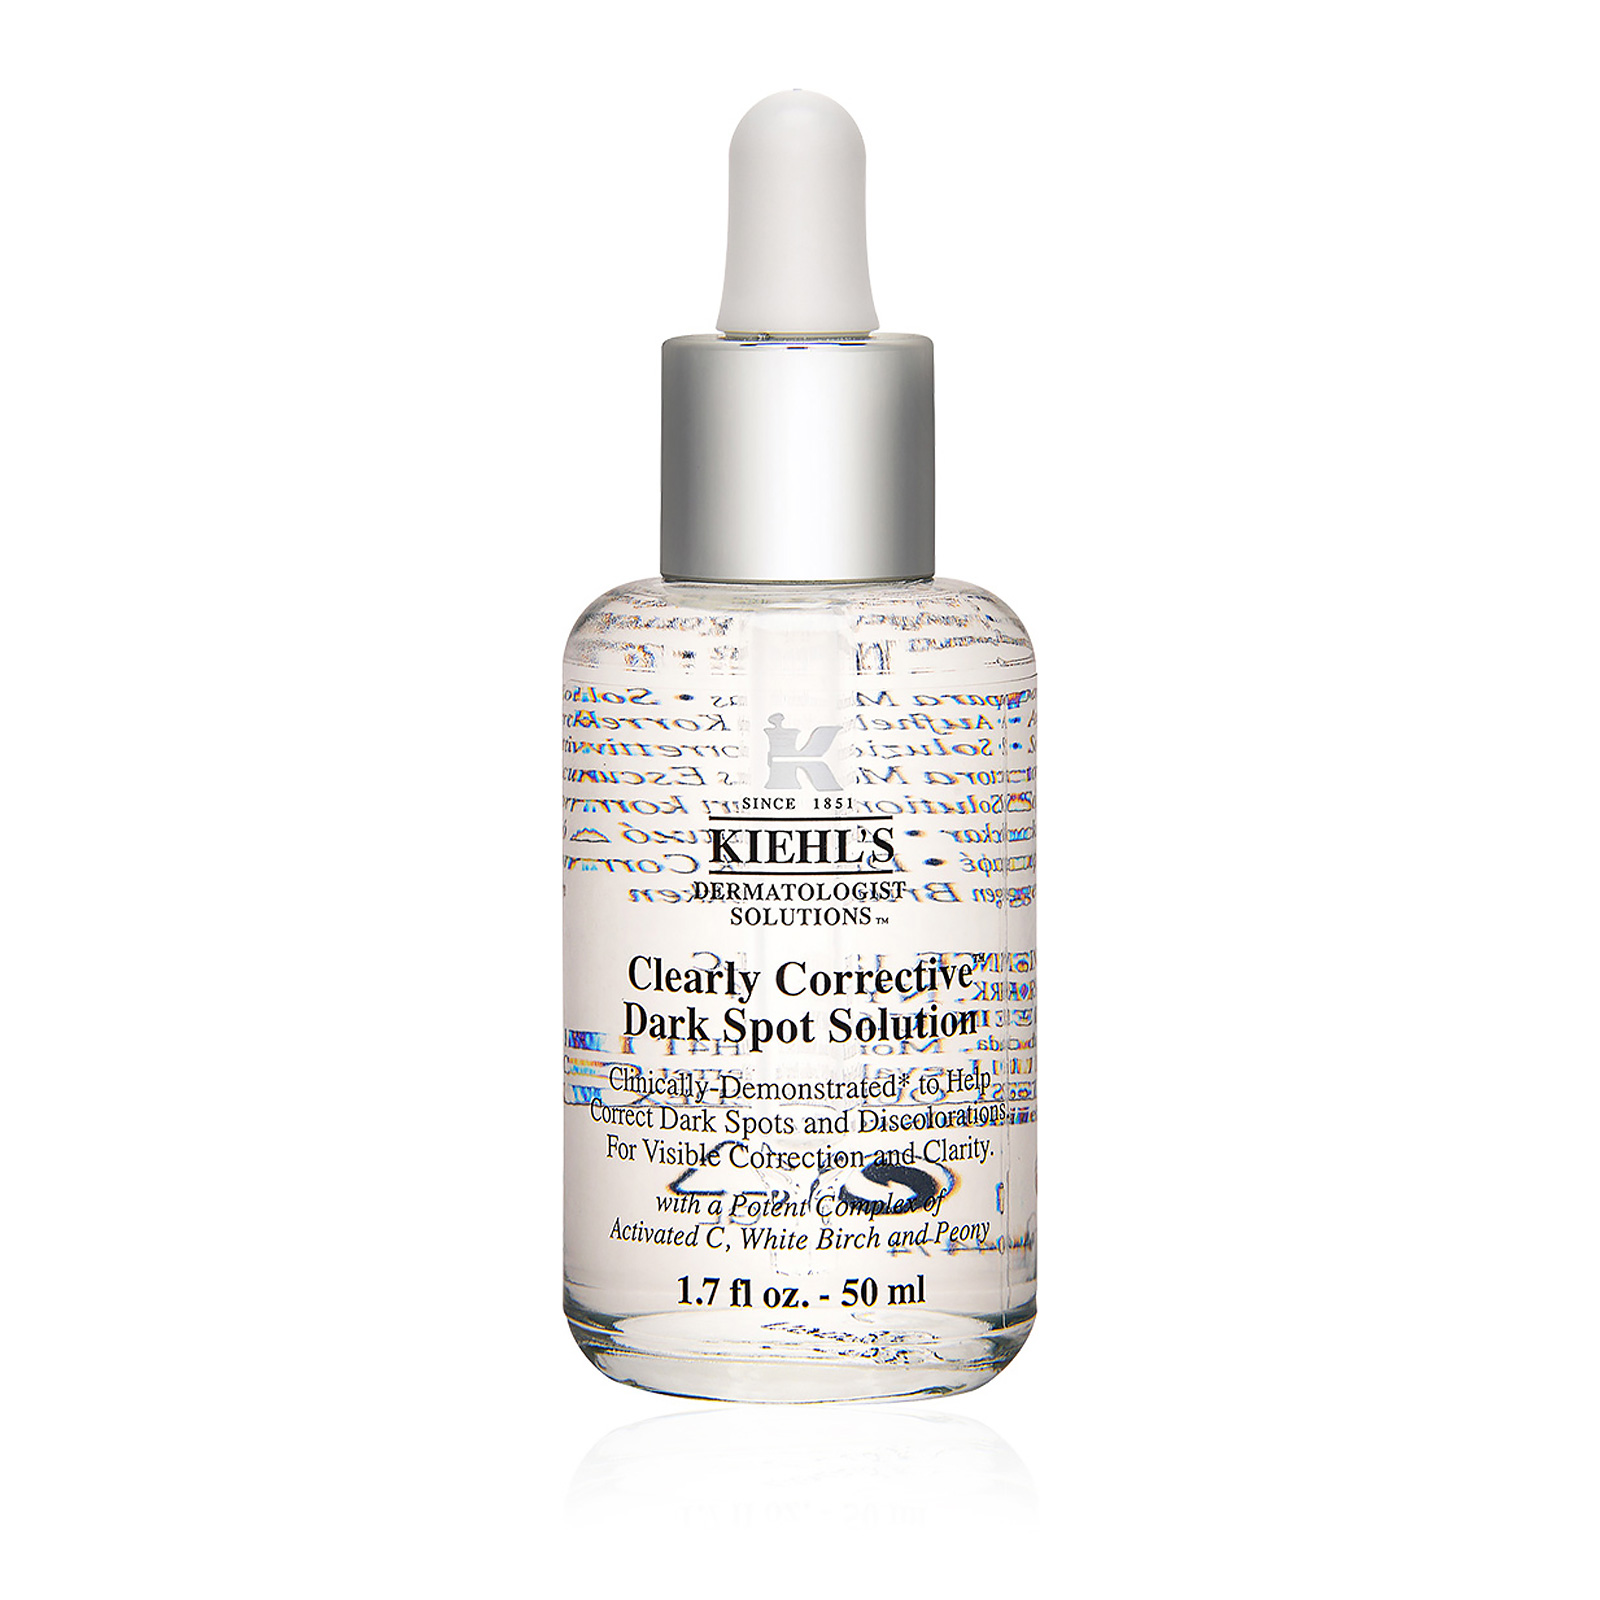 Dermatologist Solutions Clearly Corrective Dark Spot Solution